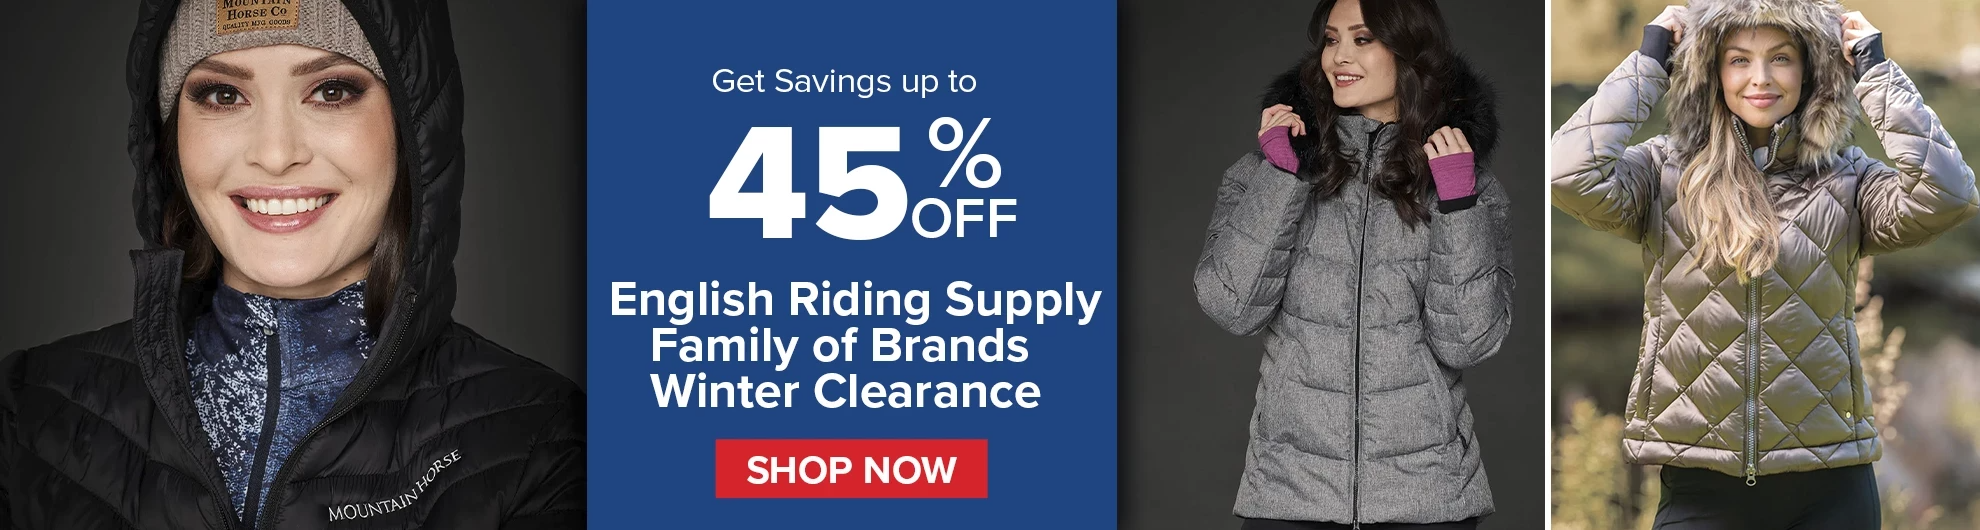 English Riding Supply Brand Clearance